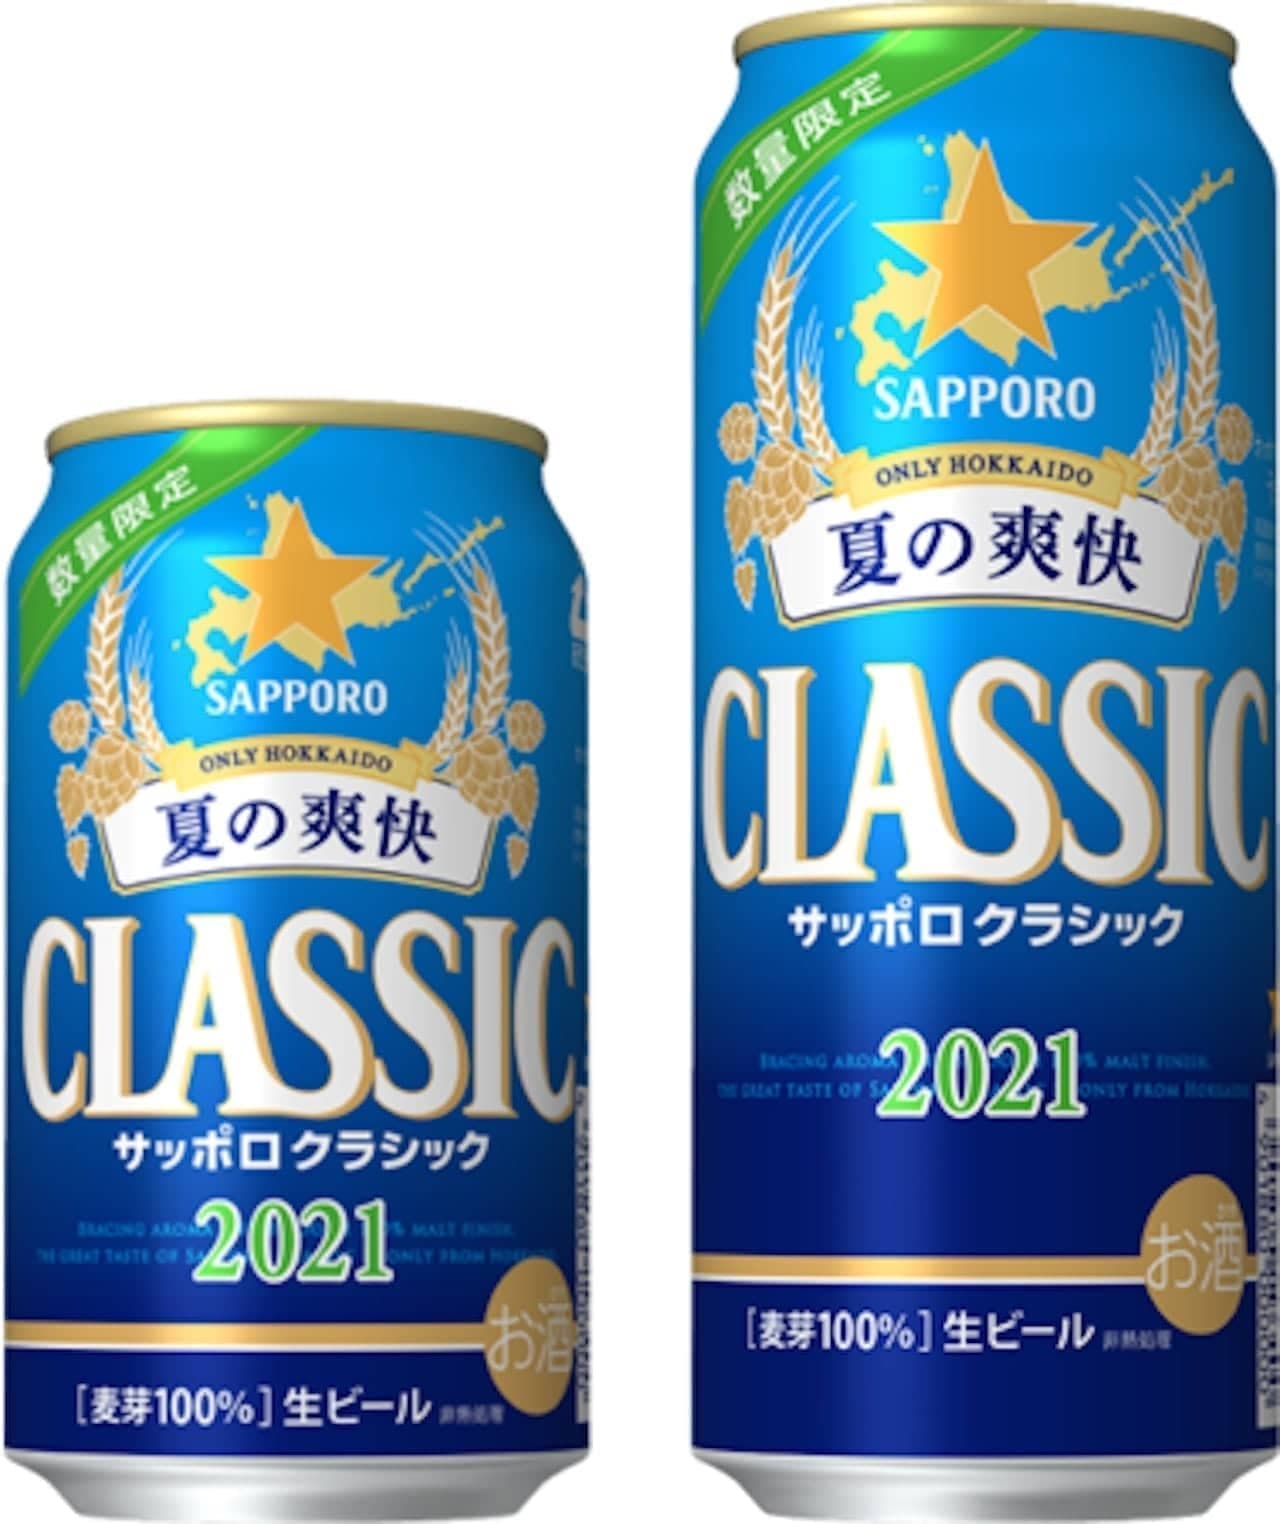 Summer limited "Sapporo Classic Summer Exhilaration"